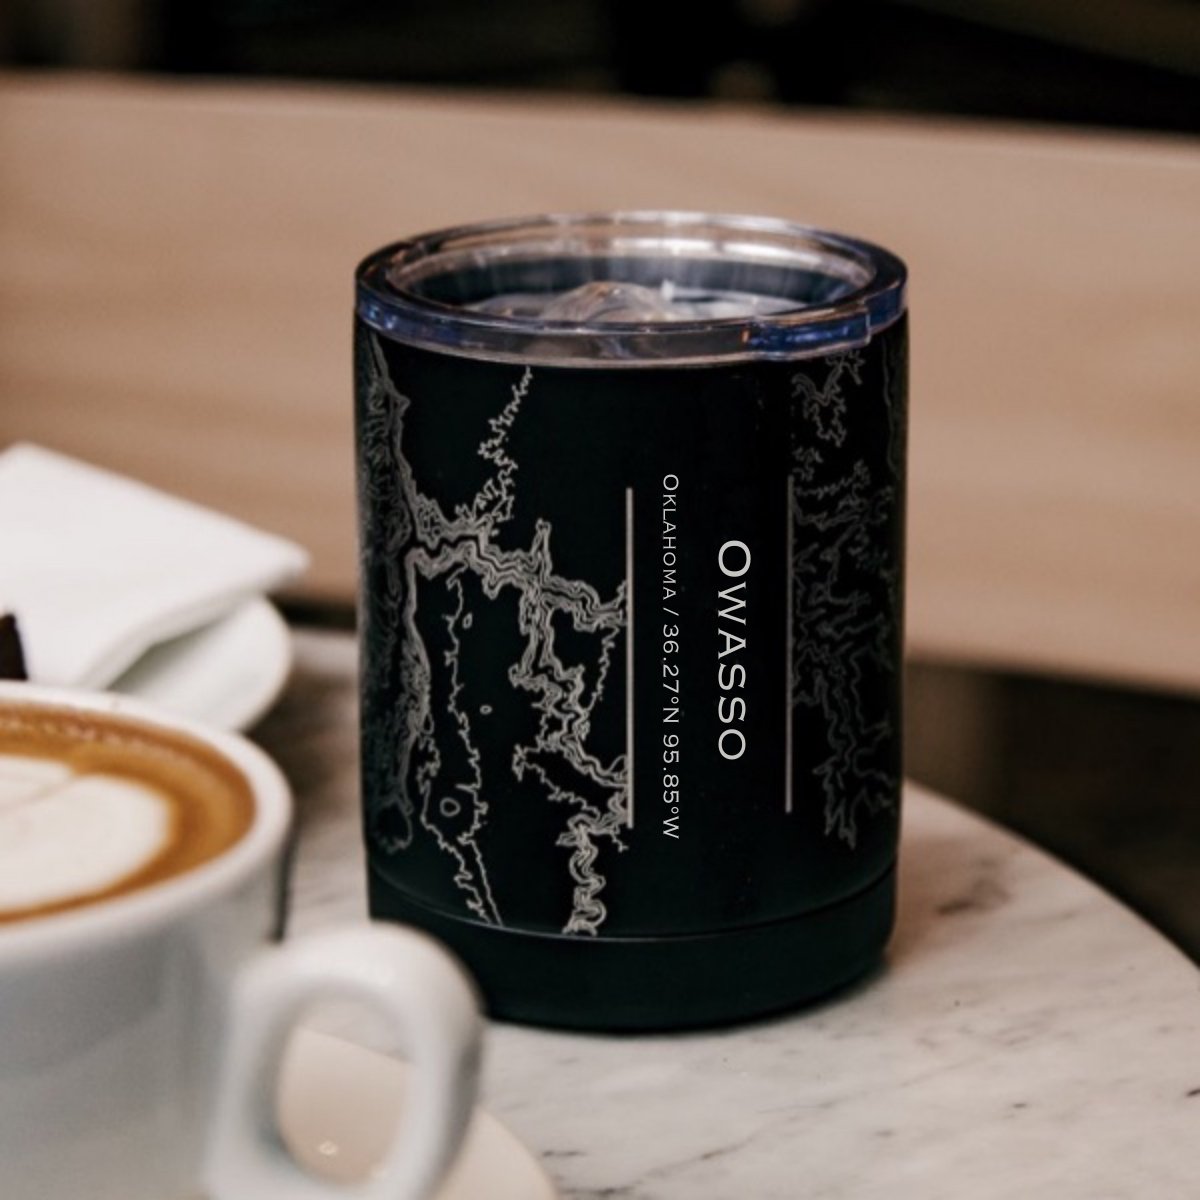 Owasso - Oklahoma Engraved Map Insulated Cup in Matte Black | Cyan Castor